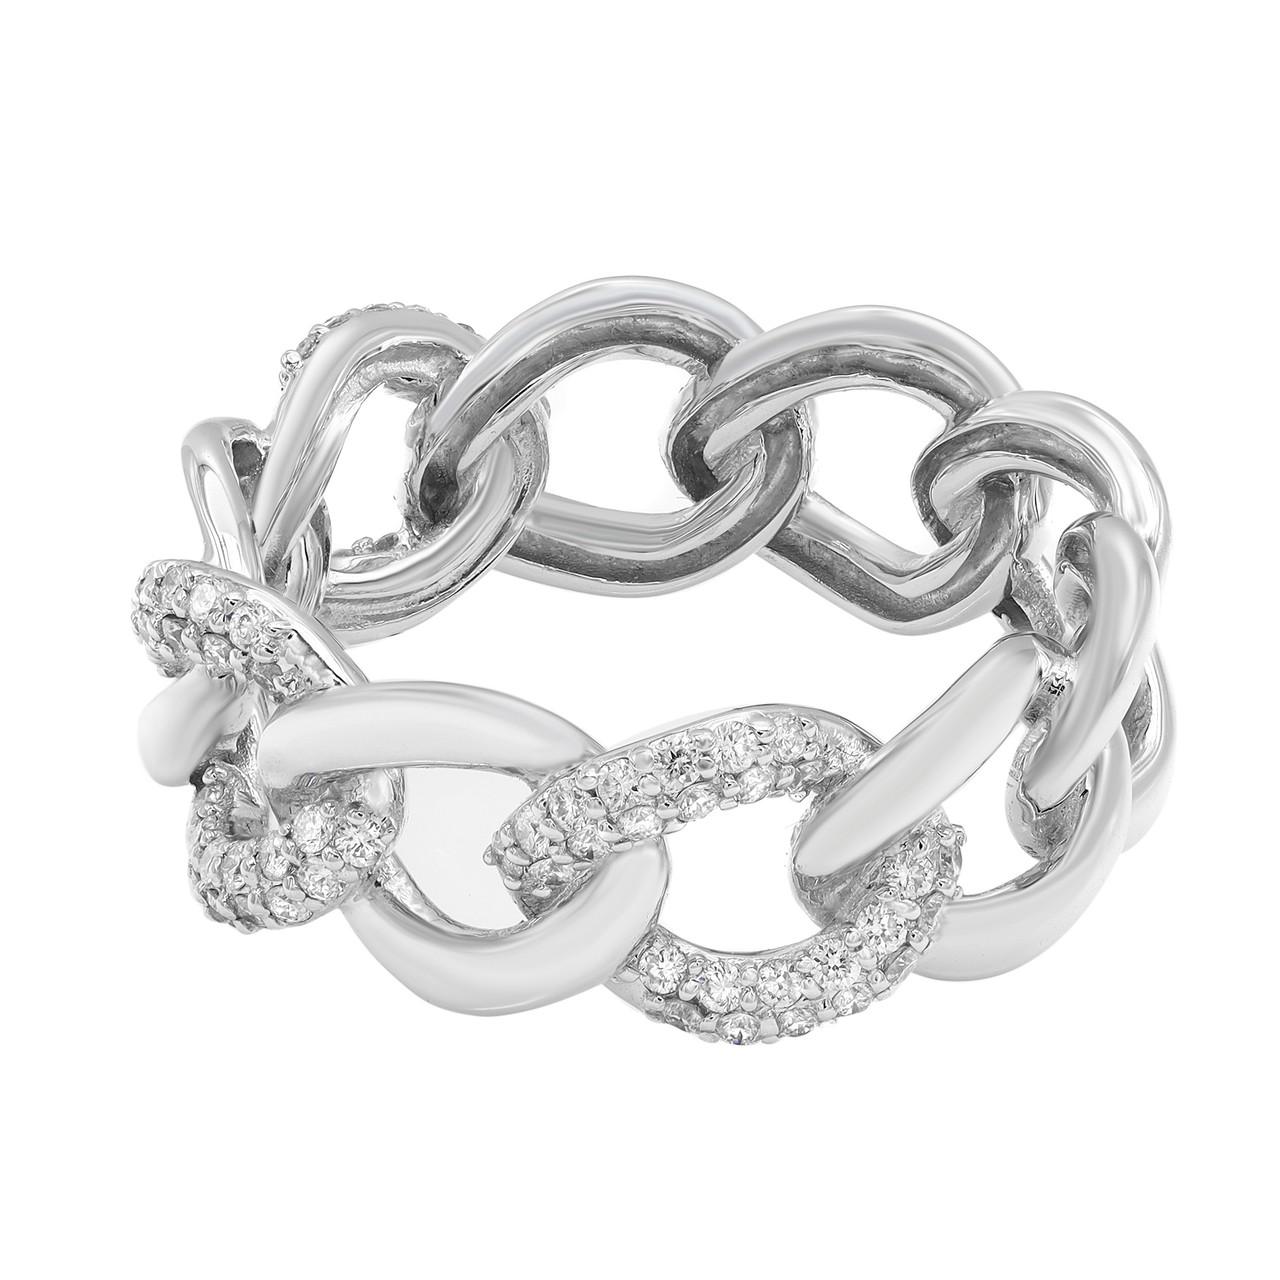 Introducing our stunning 0.50 Carat Diamond Chain Link Ring in 18K White Gold. This ring is a true showstopper with its intricate chain-link design and sparkling pavé diamonds. Crafted with care, it is made from luxurious 18K white gold, giving it a